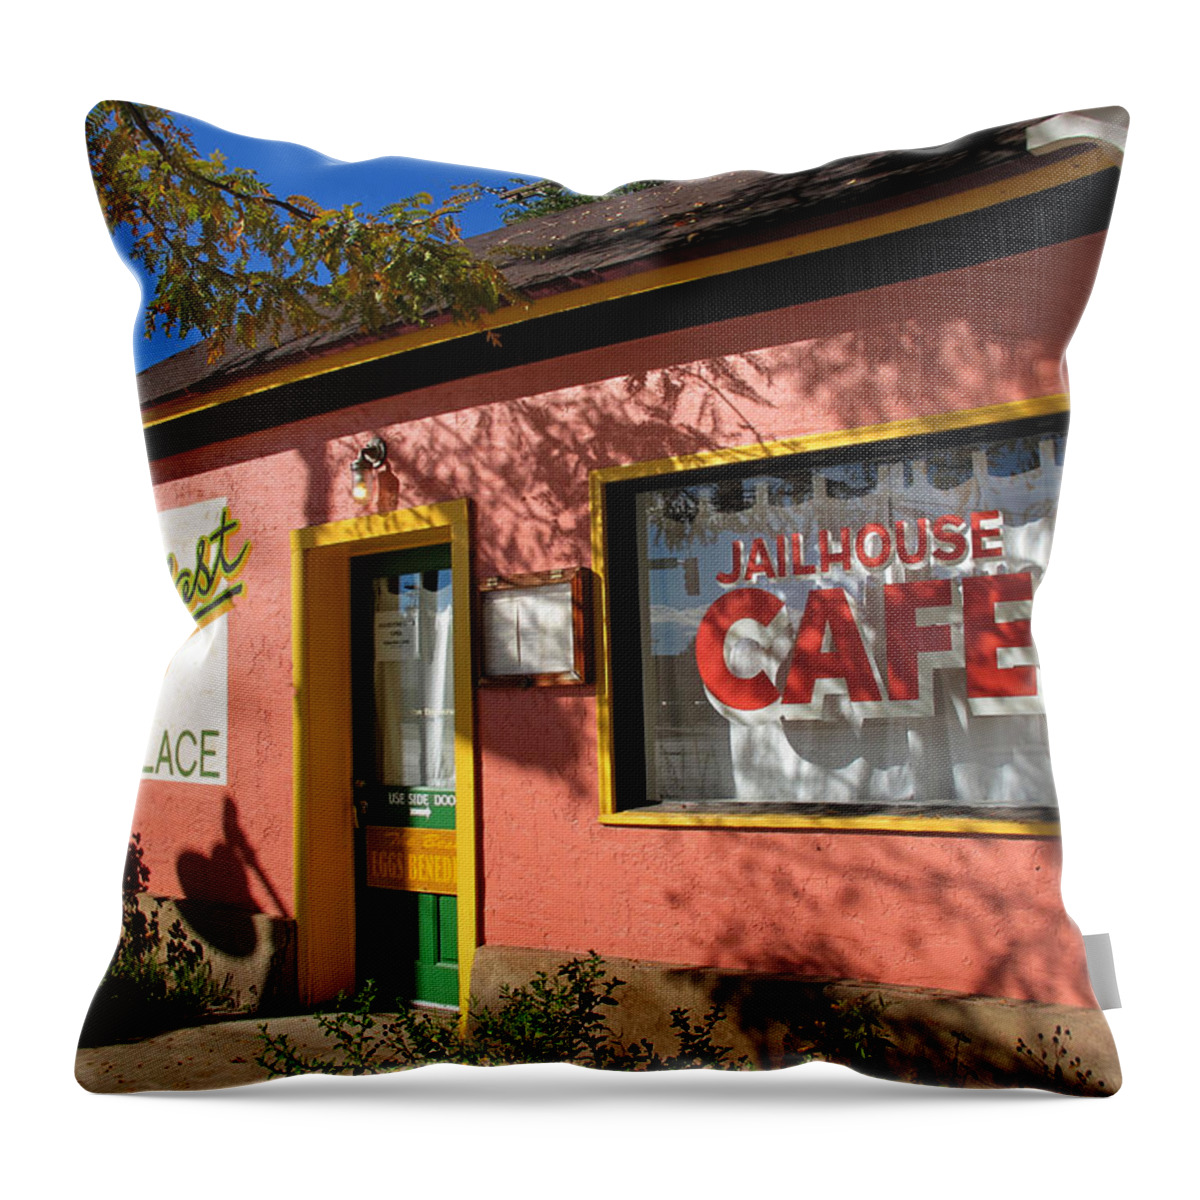 Jailhouse Cafe Throw Pillow featuring the photograph Jailhouse Cafe Moab Utah by Lawrence Christopher